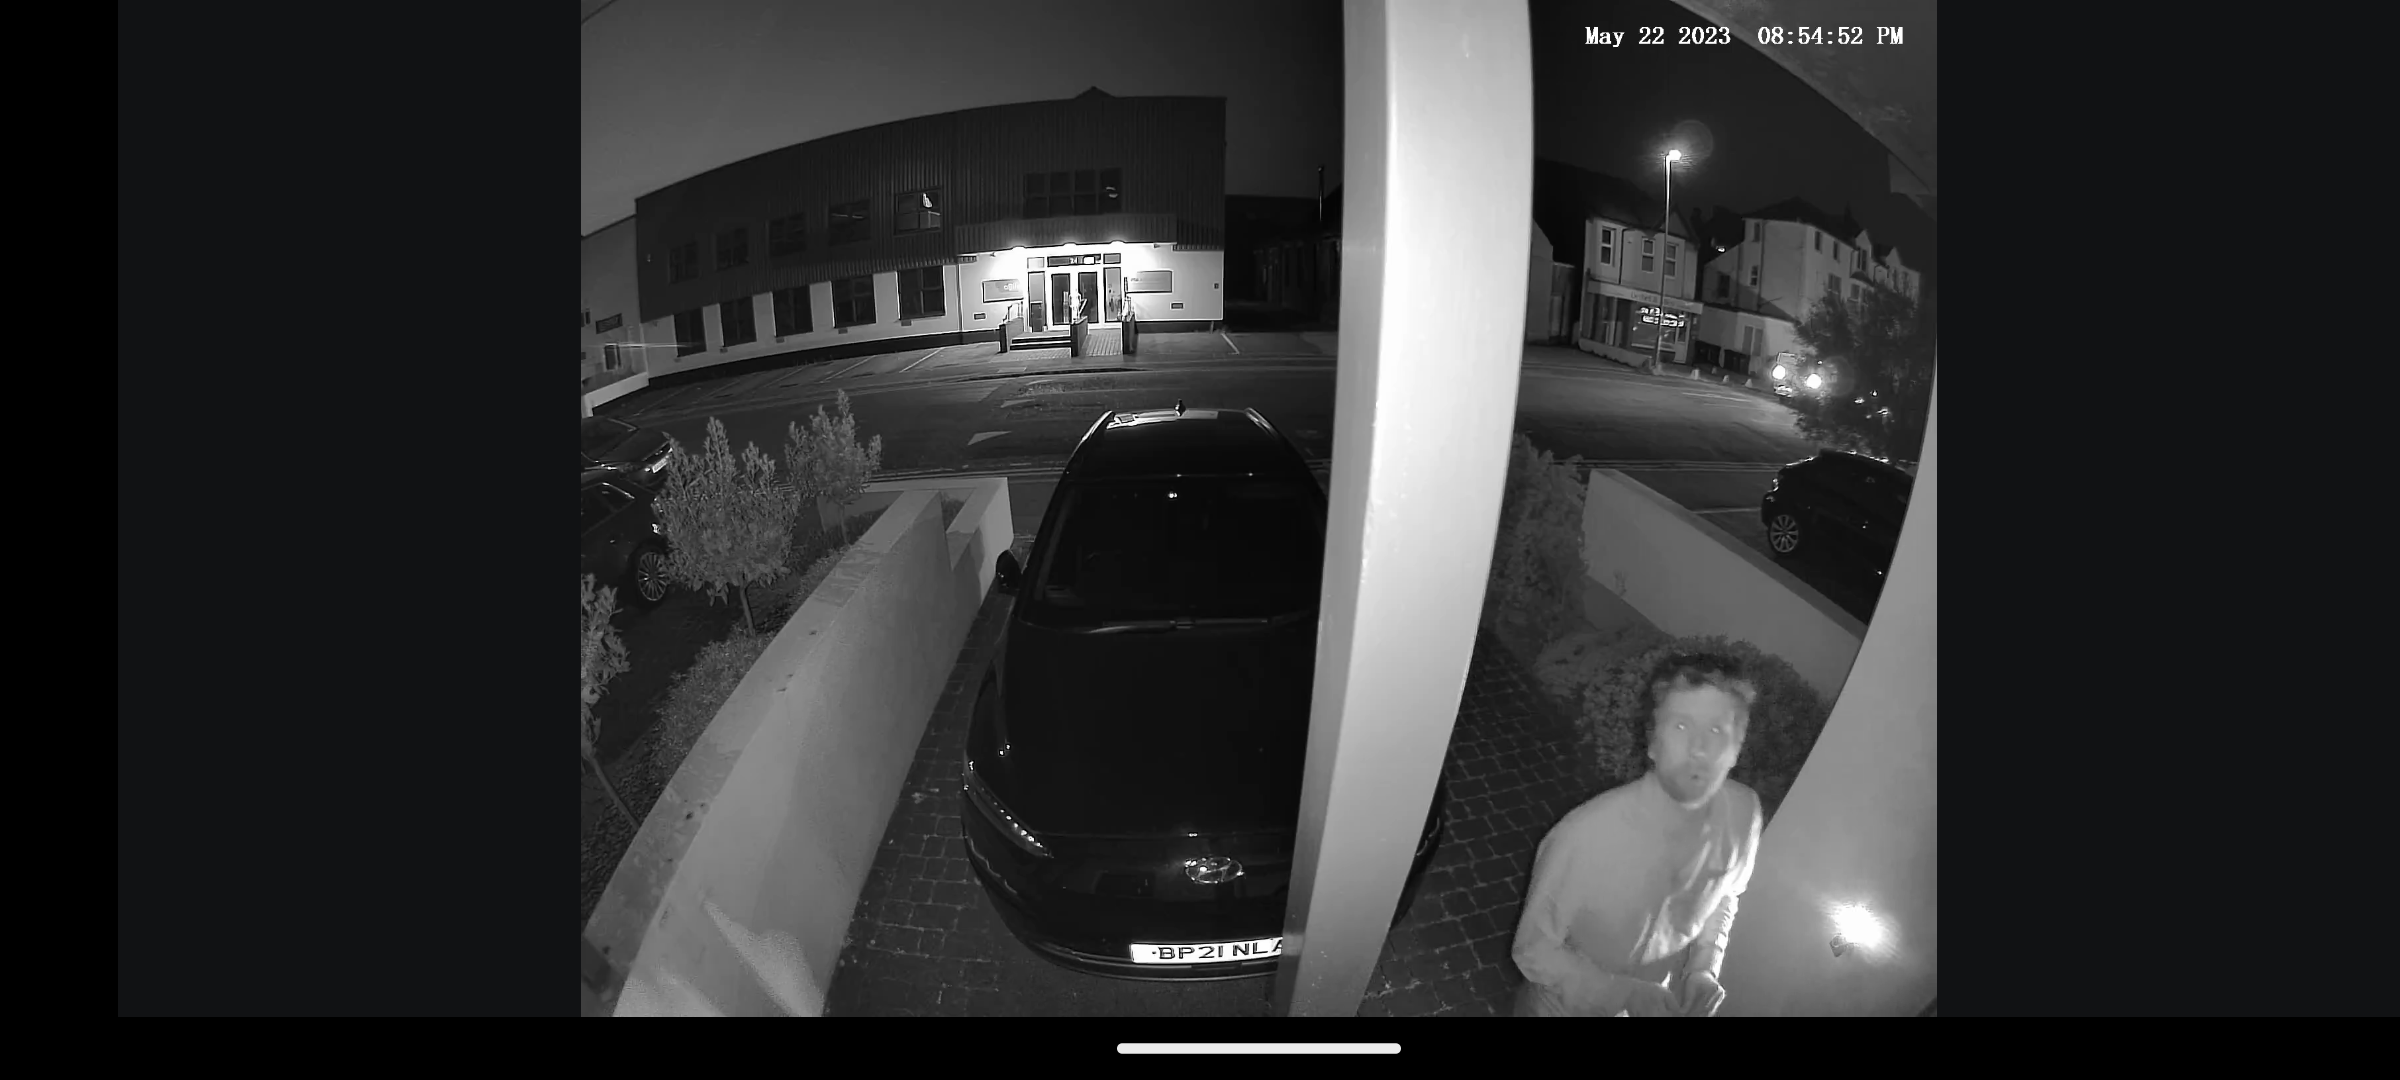 Left ImageNighttime surveillance footage from Eufy security camera.Eufy S100 camera night view capturing a person outdoors.